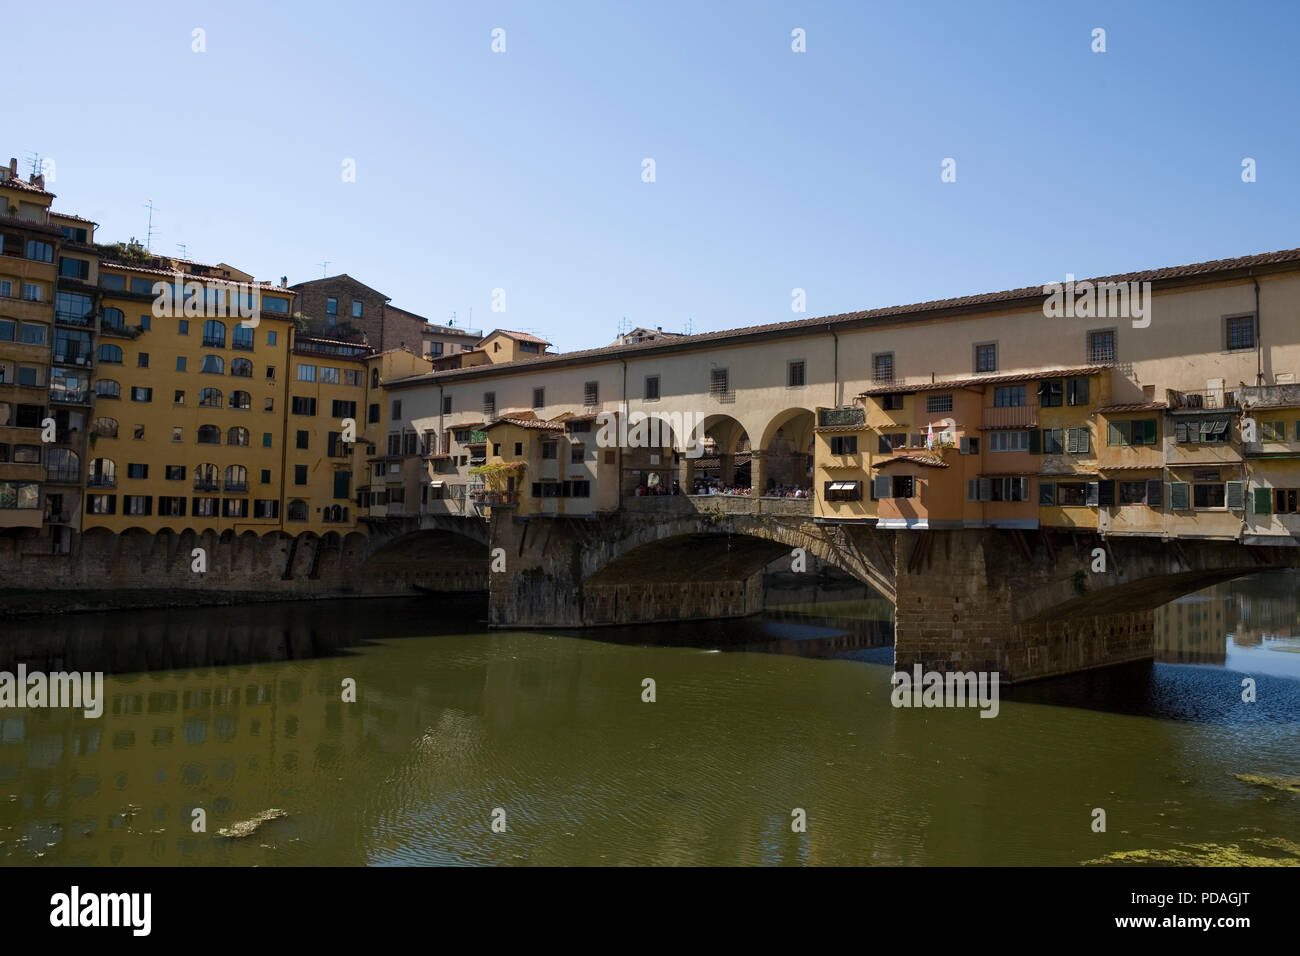 The iconic Ponte Vecchio spanning the River Arno in Florence Tuscany, Italy Stock Photo